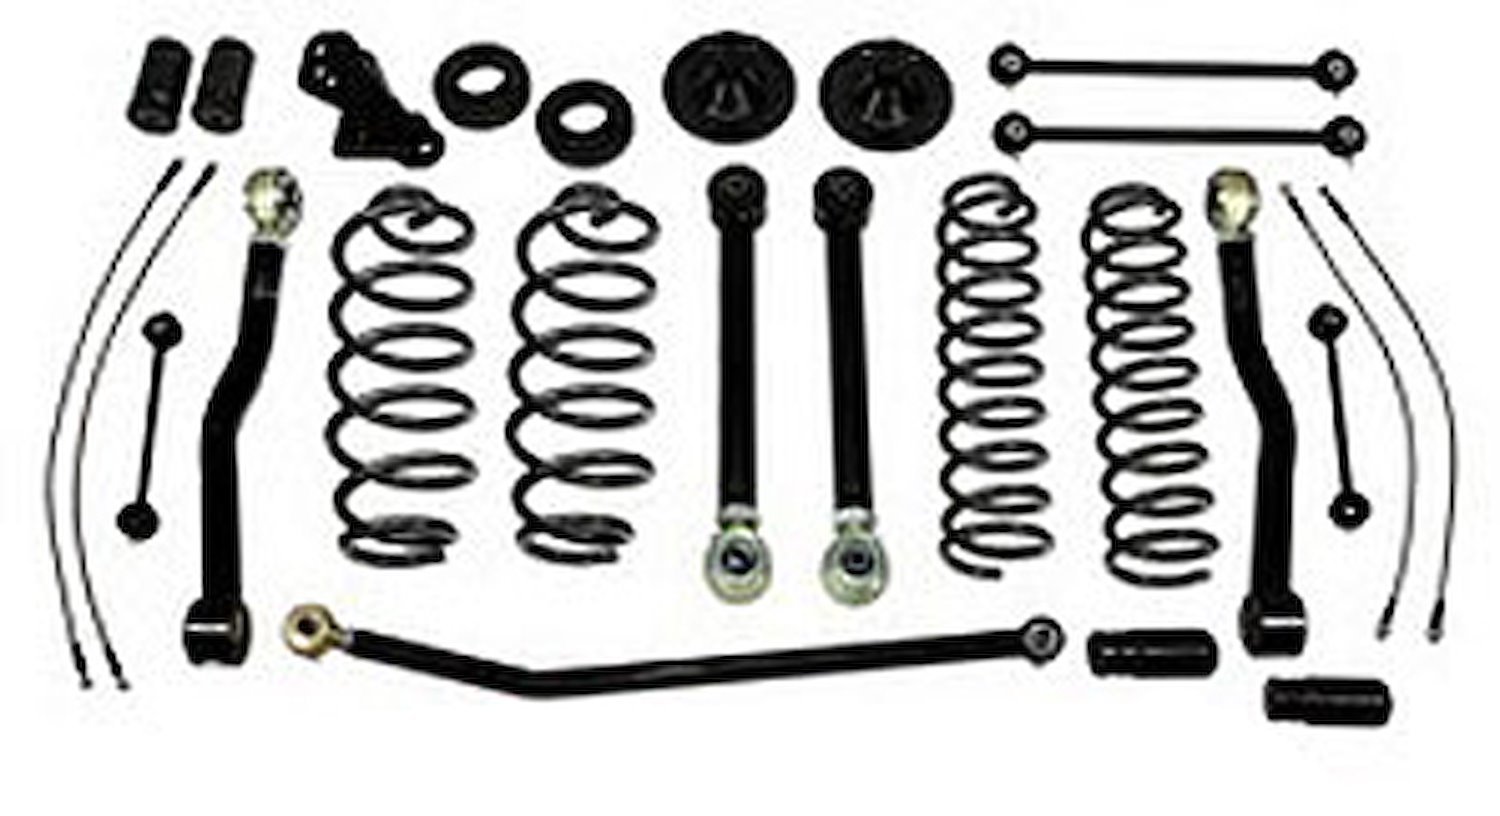 44000 Front and Rear Suspension Lift Kit, Lift Amount: 4 in. Front/4 in. Rear